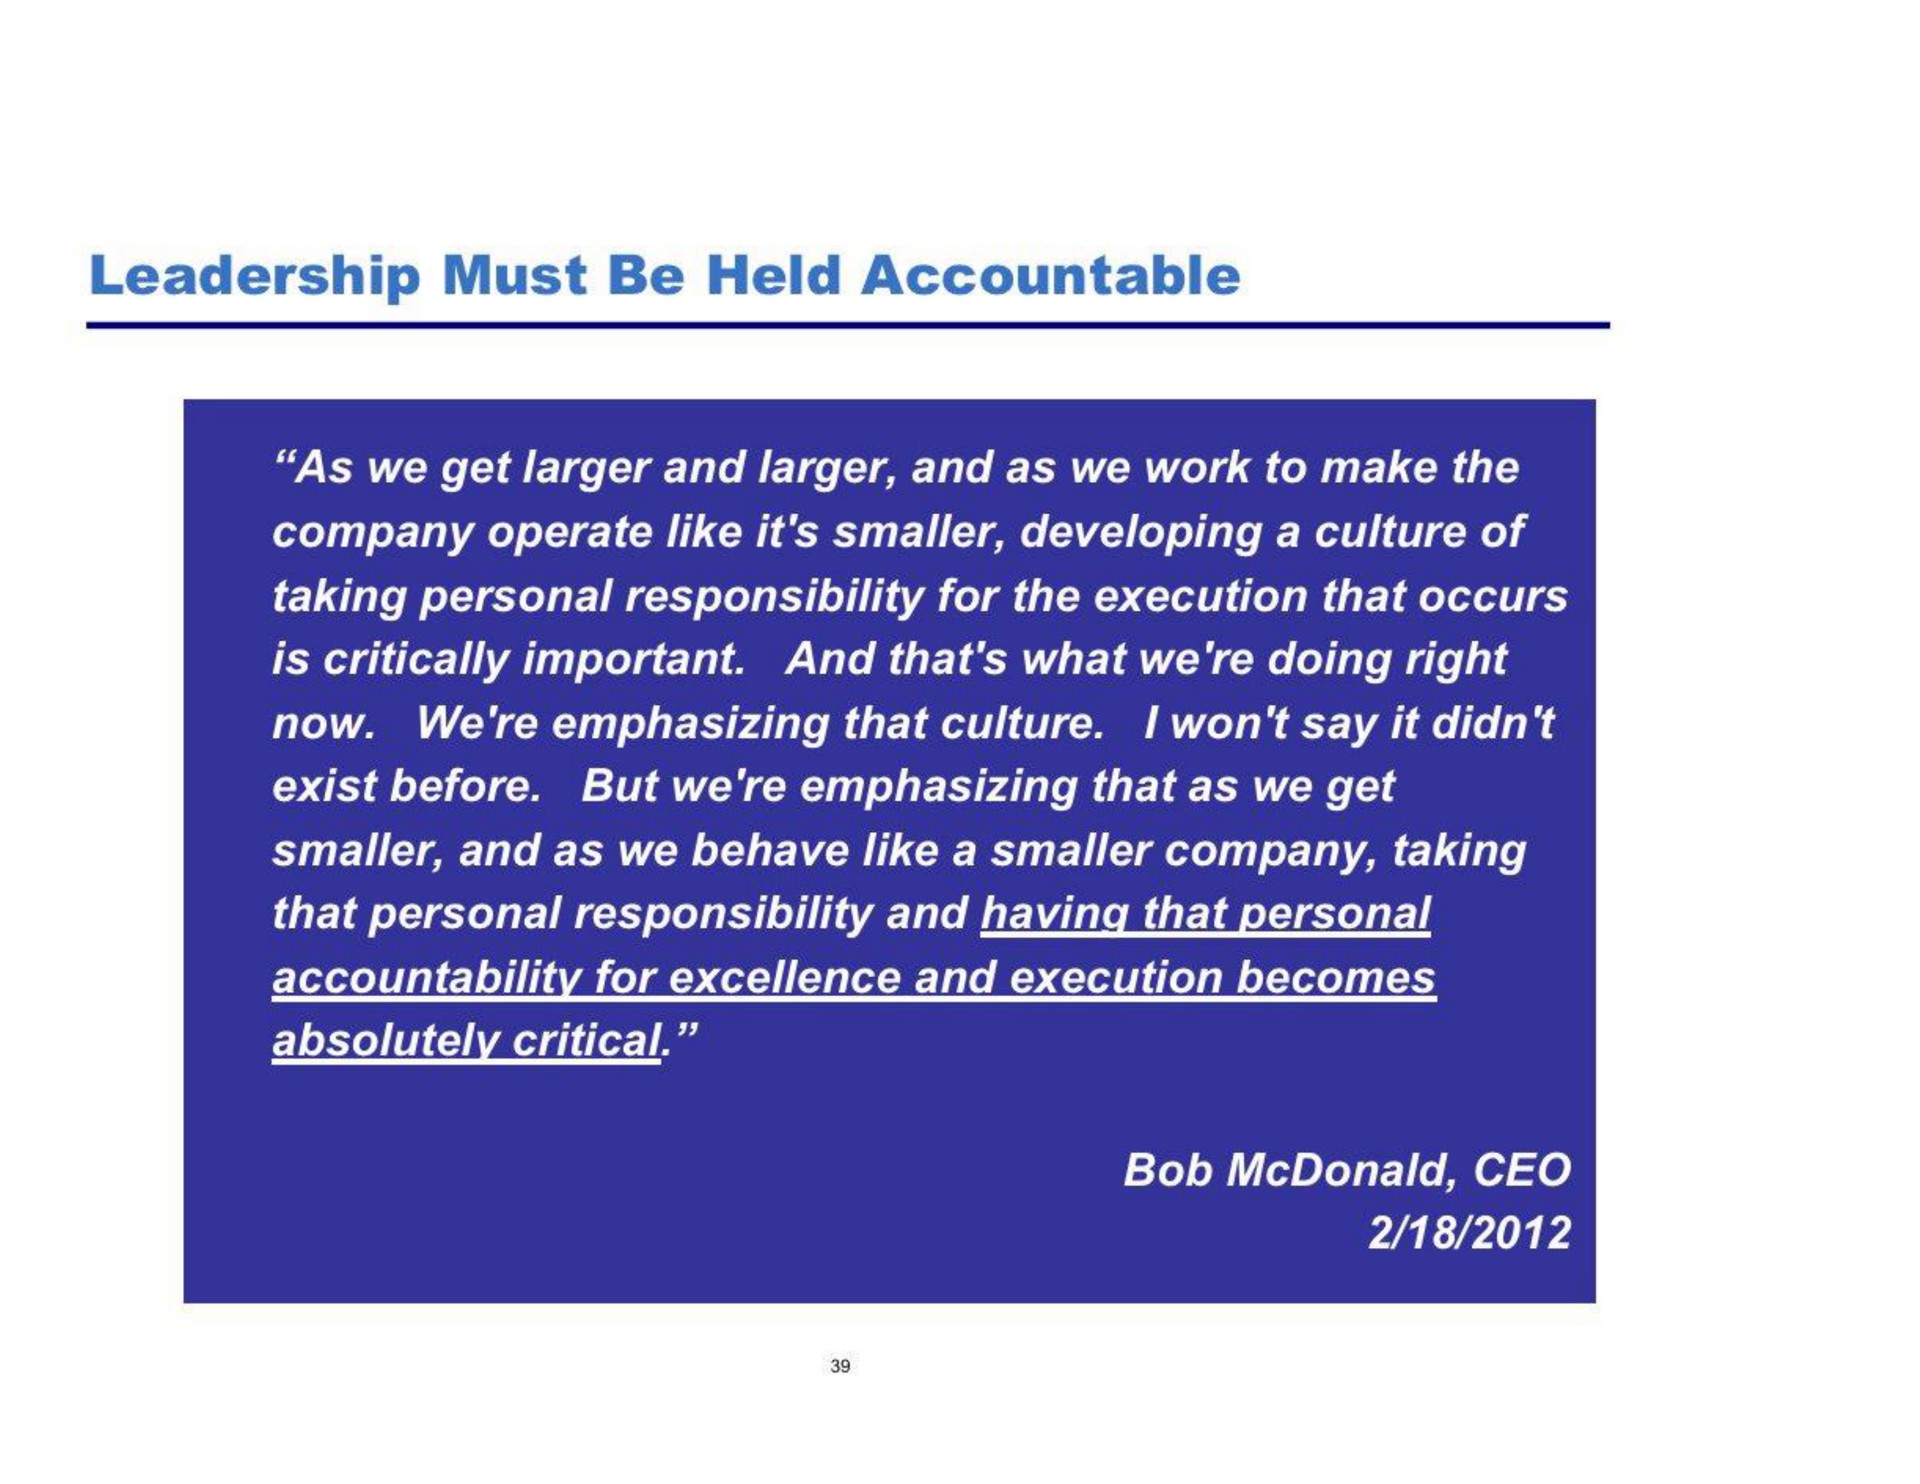 leadership must be held accountable as we get and and as we work to make the company operate like it smaller developing a culture of taking personal responsibility for the execution that occurs is critically important and that what we doing right won say it we emphasizing that culture but we emphasizing that as we get now exist before smaller and as we behave like a smaller company taking that personal responsibility and having that personal | Pershing Square